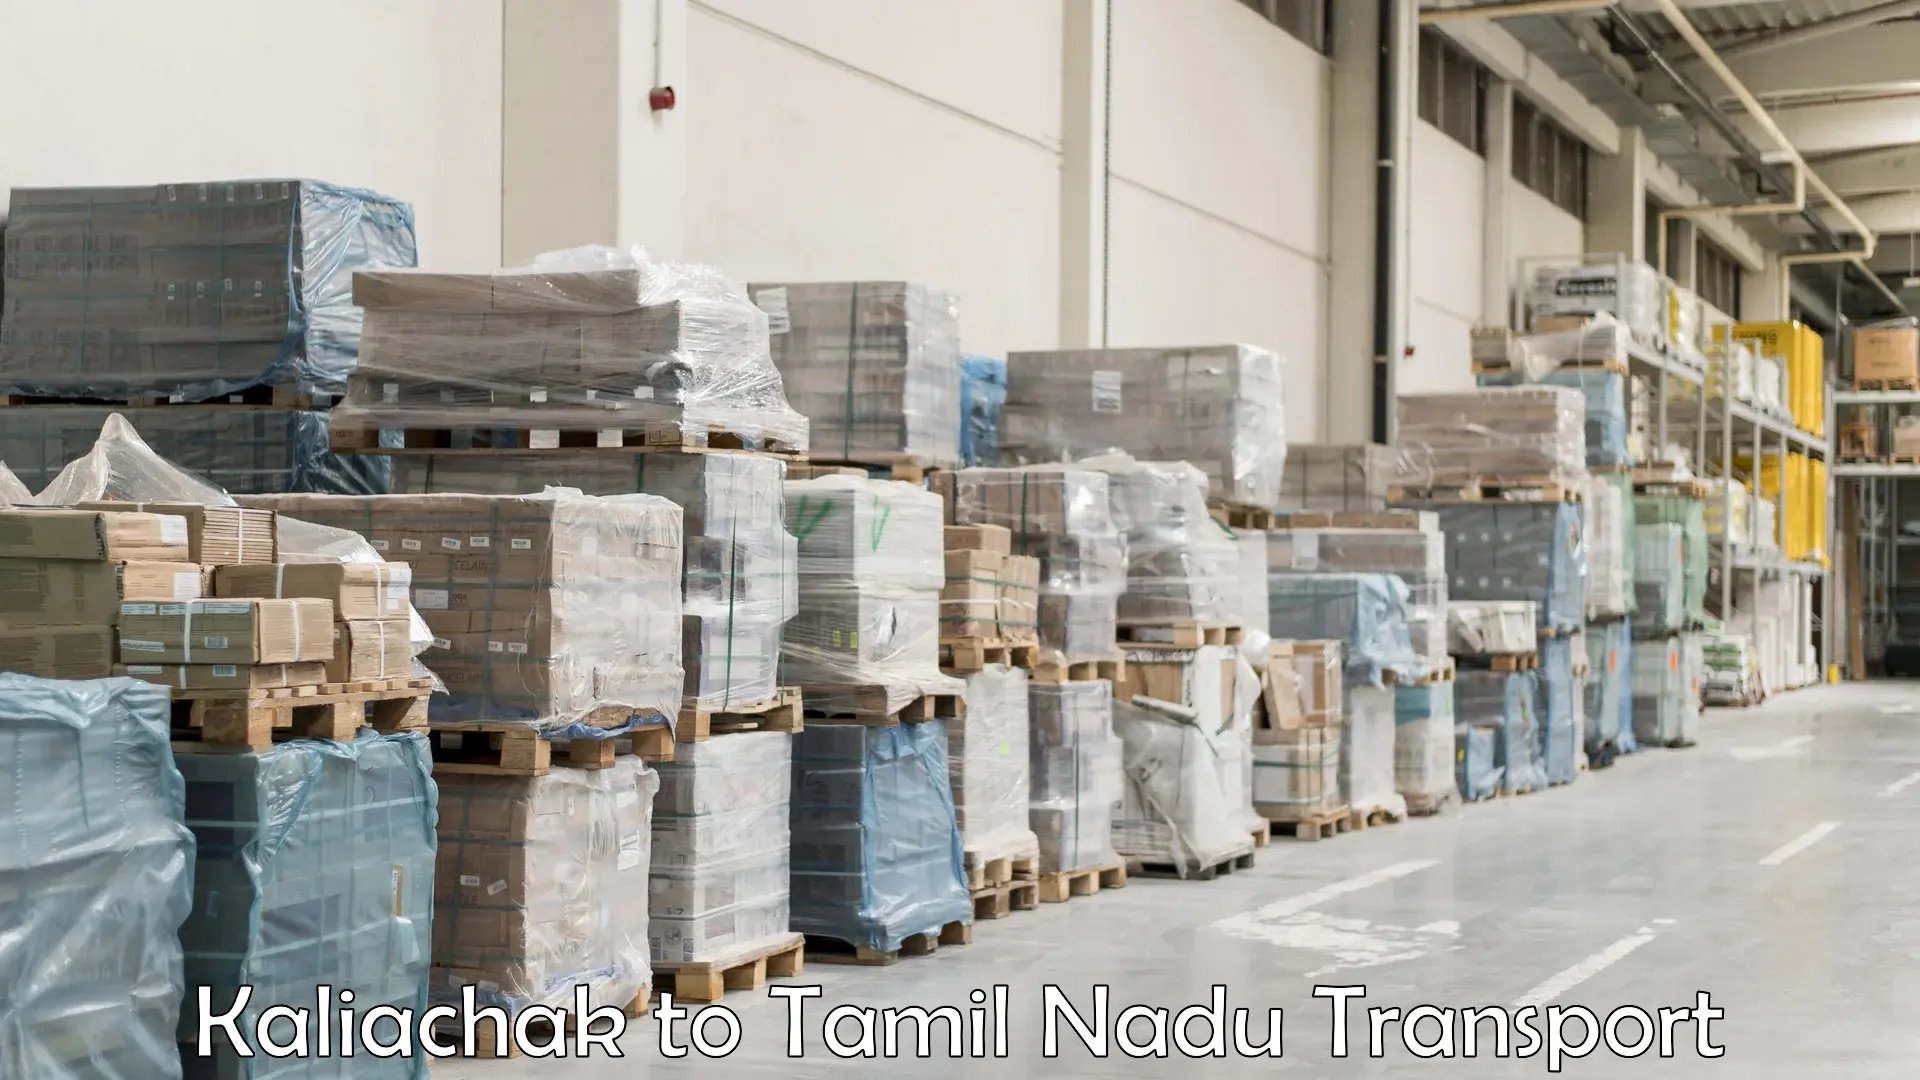 Road transport online services Kaliachak to Omalur